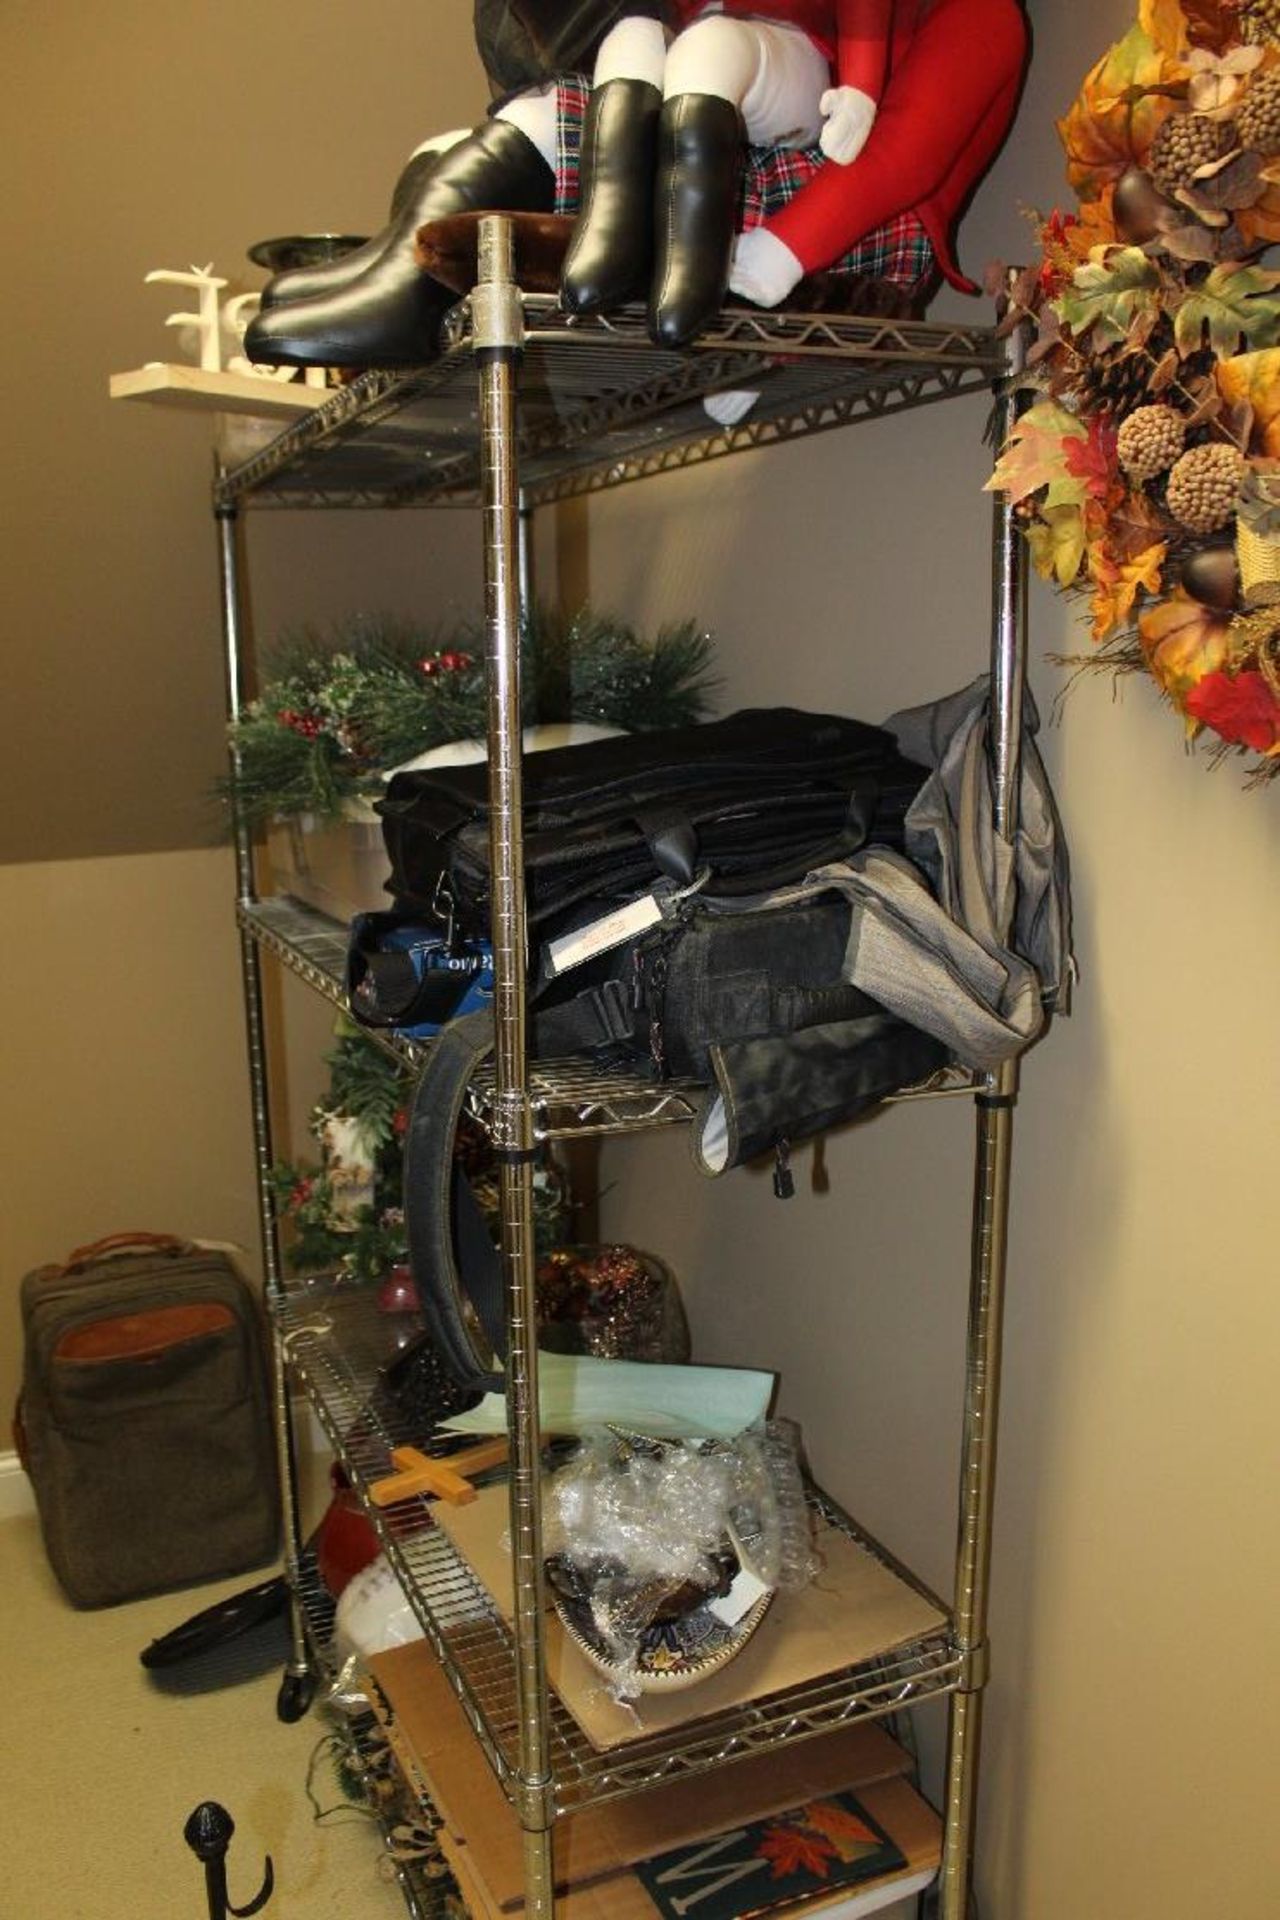 Contents of Closet, Christmas Decorations, Luggage, Tennis Rackets, Miscellaneous Items - Image 3 of 3